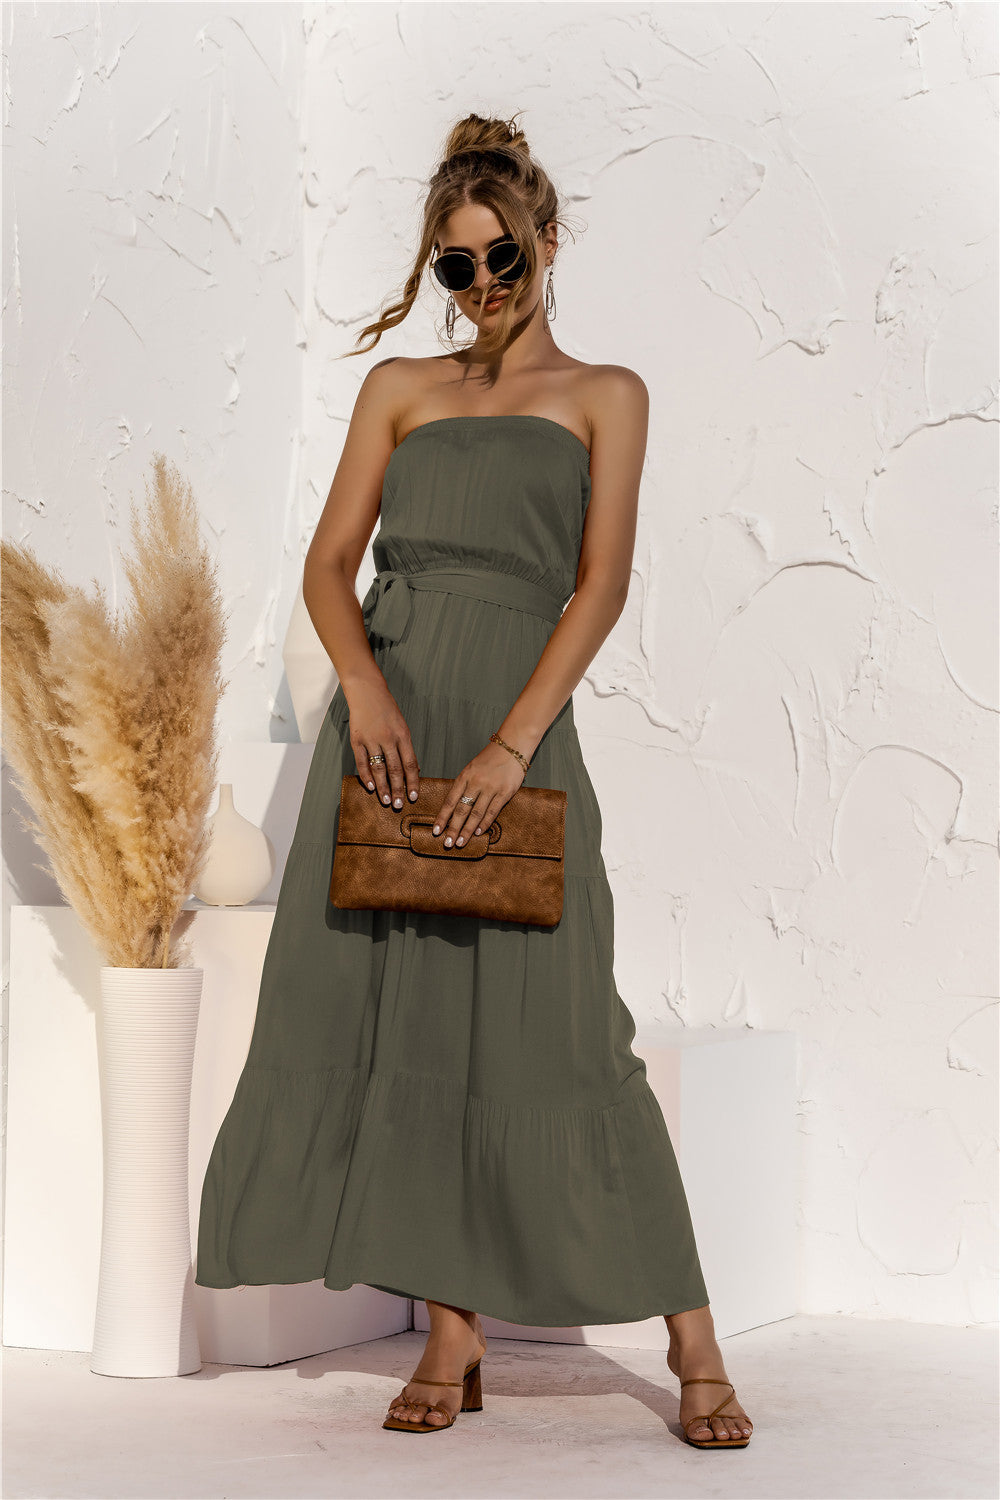 Don’t Mind Me Strapless Maxi Dress - light green strapless maxi dress with top overlay and tie waist. #Firefly Lane Boutique1